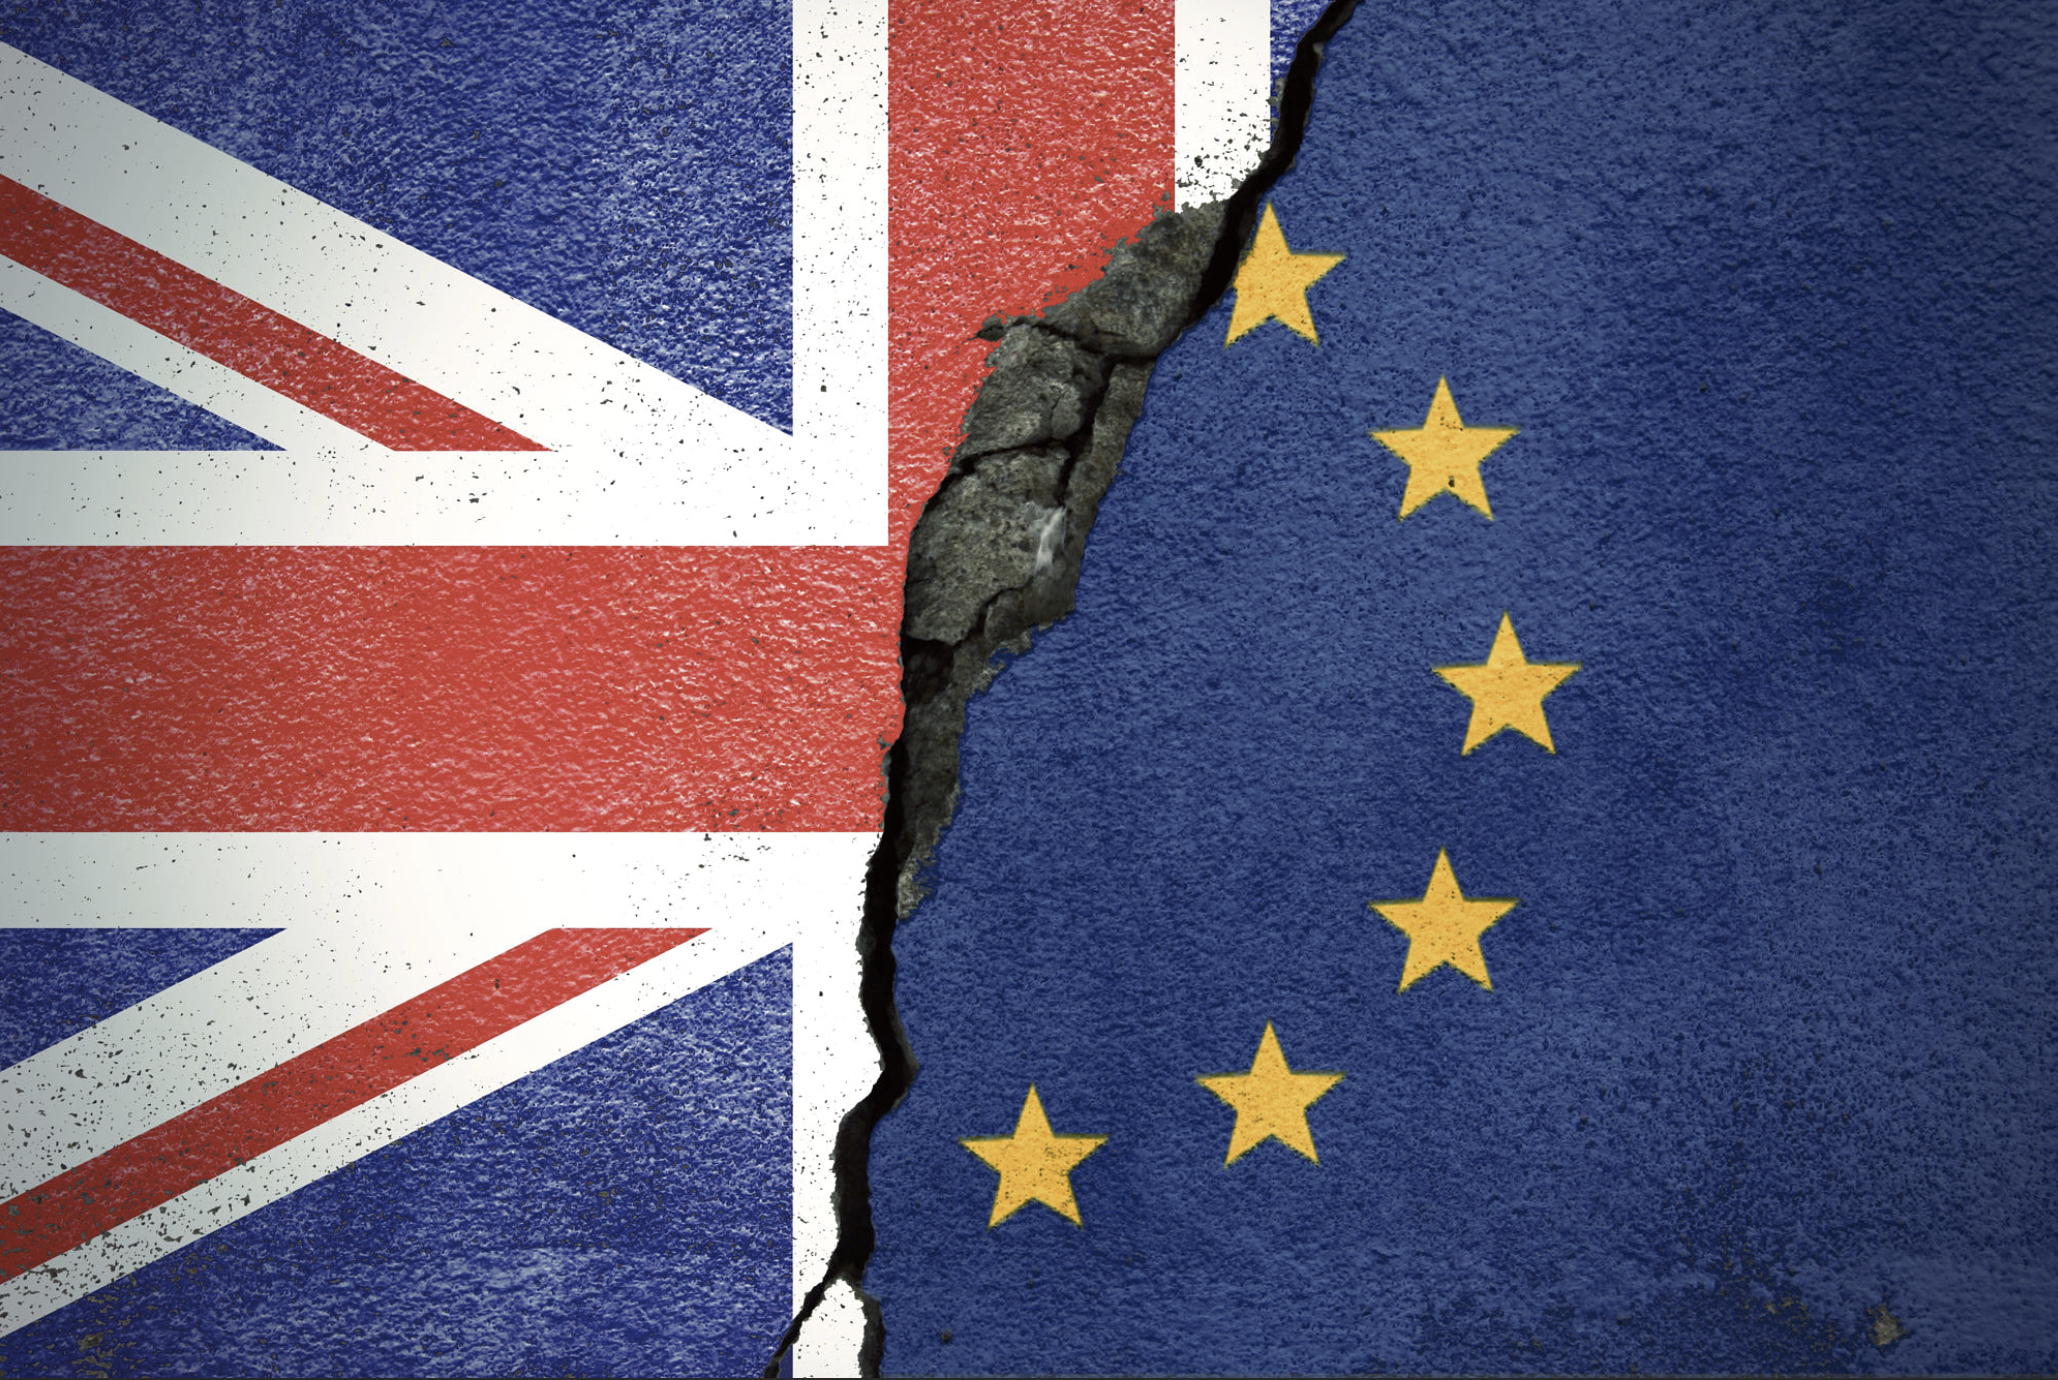 Back to Brexit – What Will The Impacts Be On The UK Tech Industry